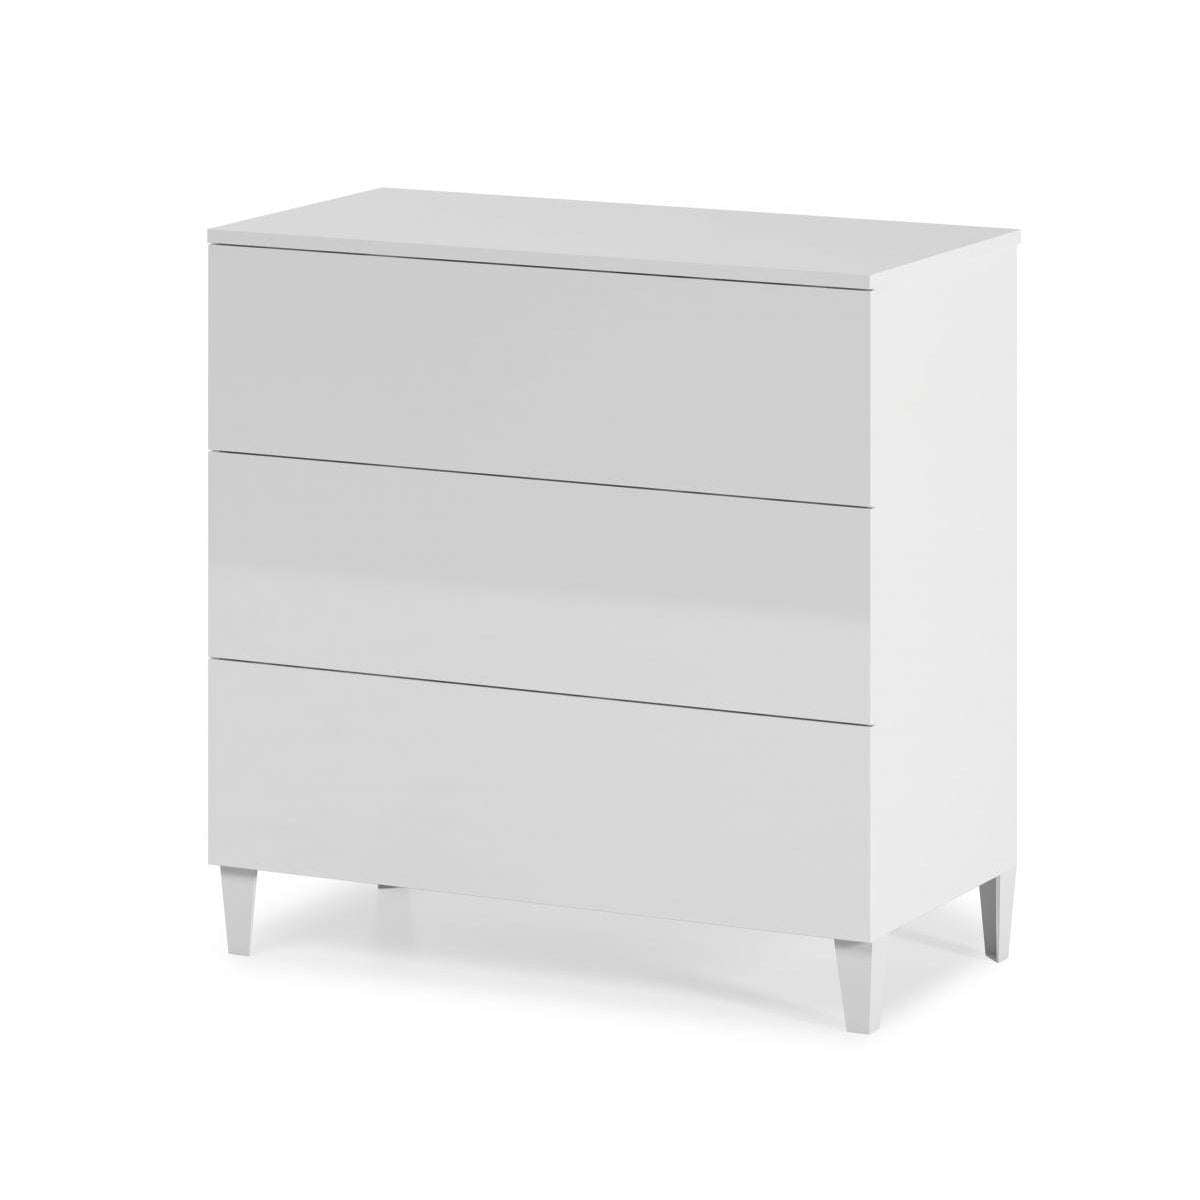 Ashpinoke:Arctic Chest 3 Drawer White 007833BO,Chests and Drawers,Heartlands Furniture